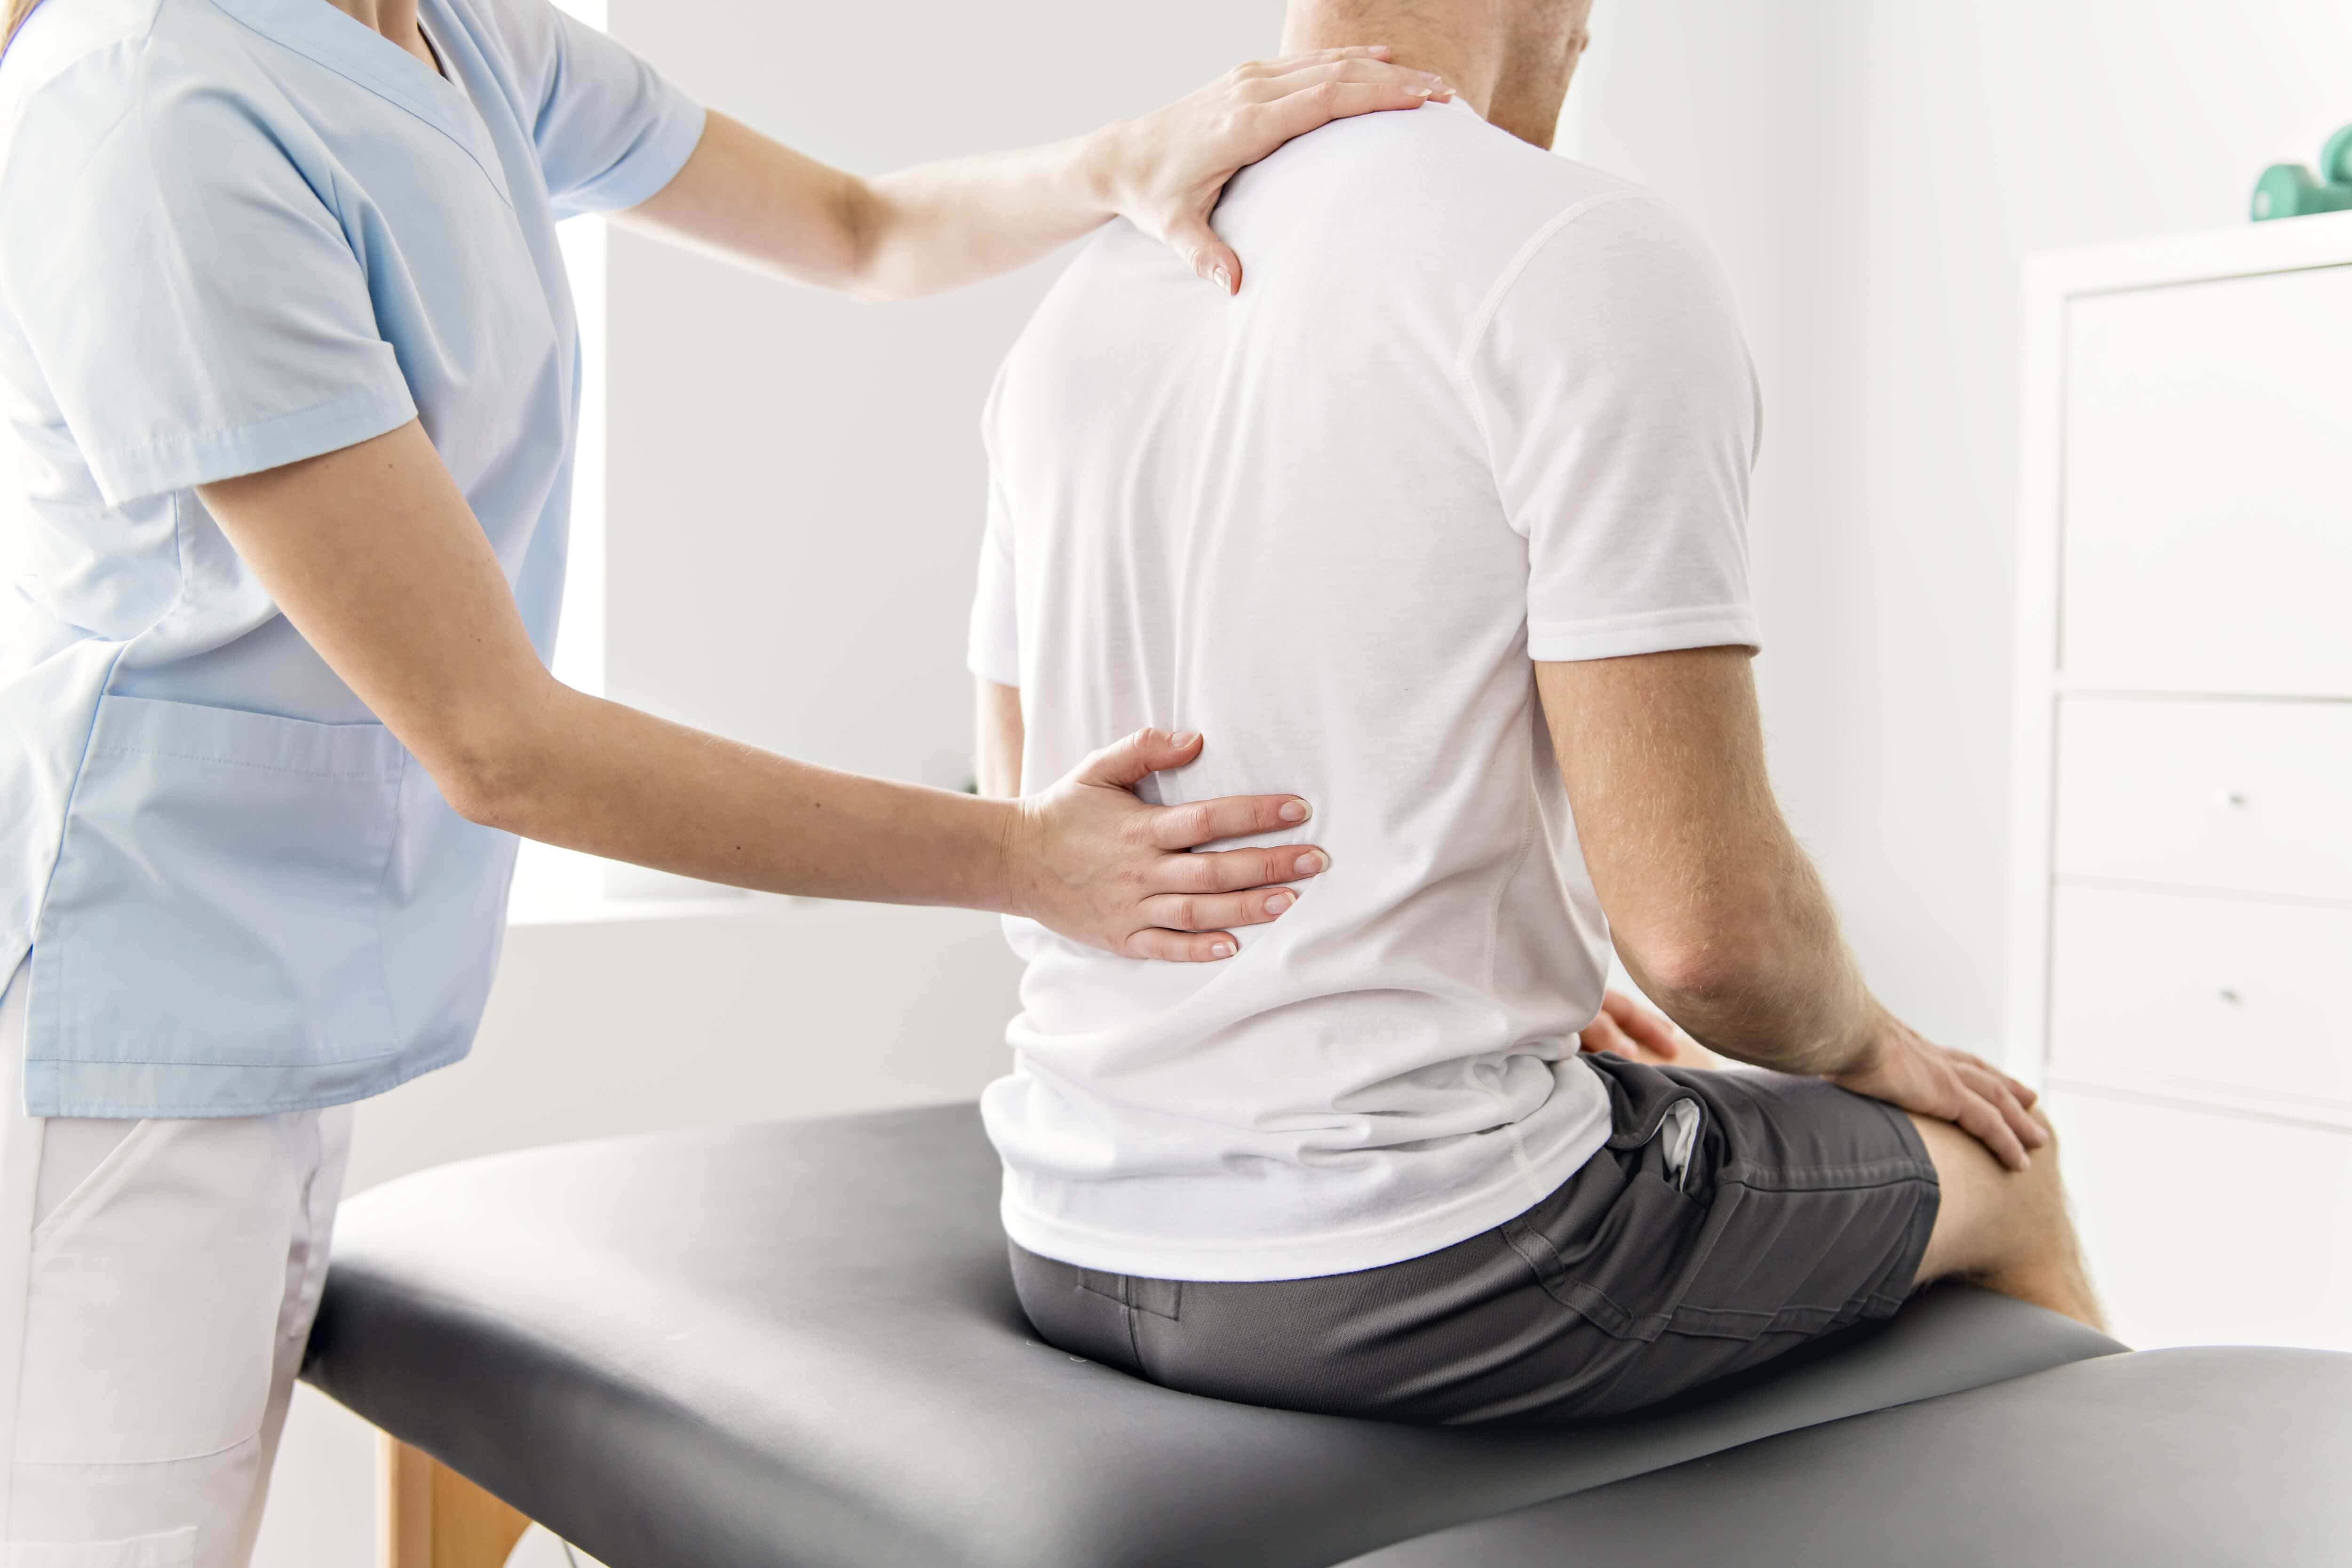 Get Rid of Your Chronic Back Pain! 5 Ways a Physical Therapist Can Help Relieve Your Pain.